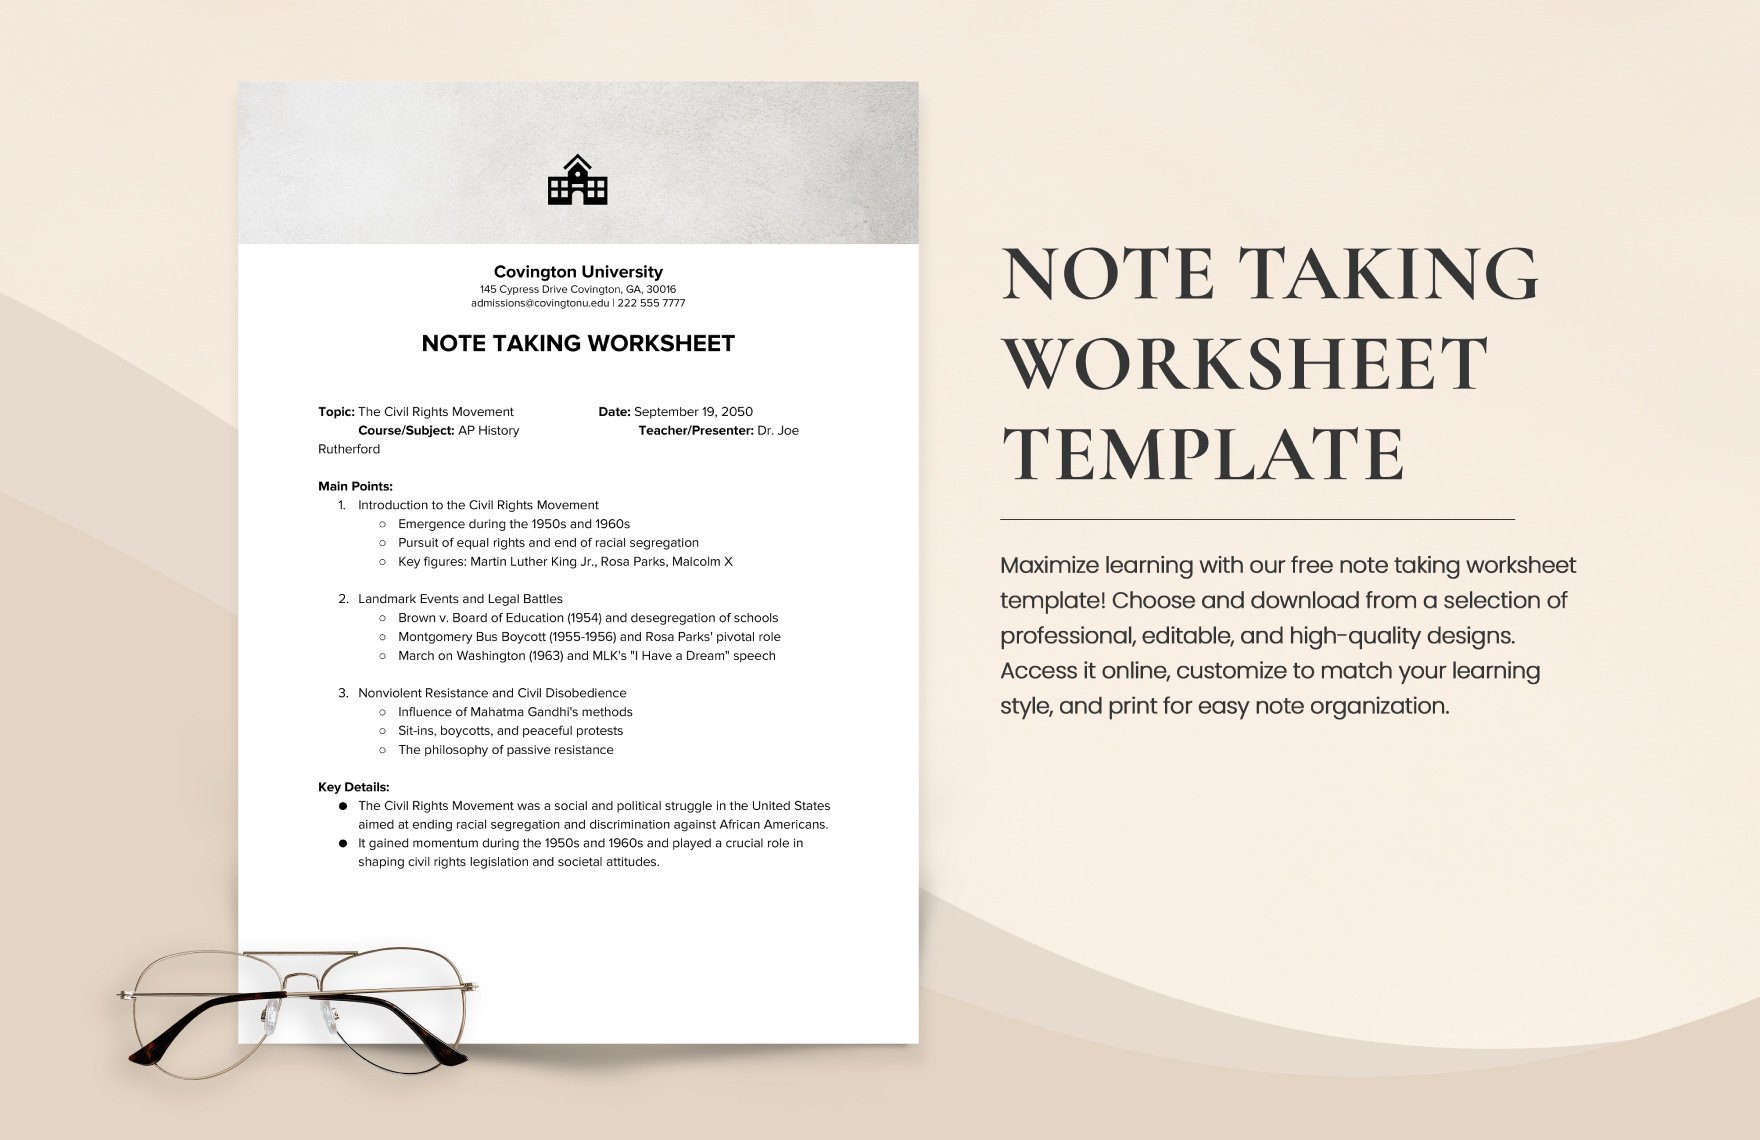 Note Taking Worksheet Template in Word, Google Docs, PDF, Apple Pages